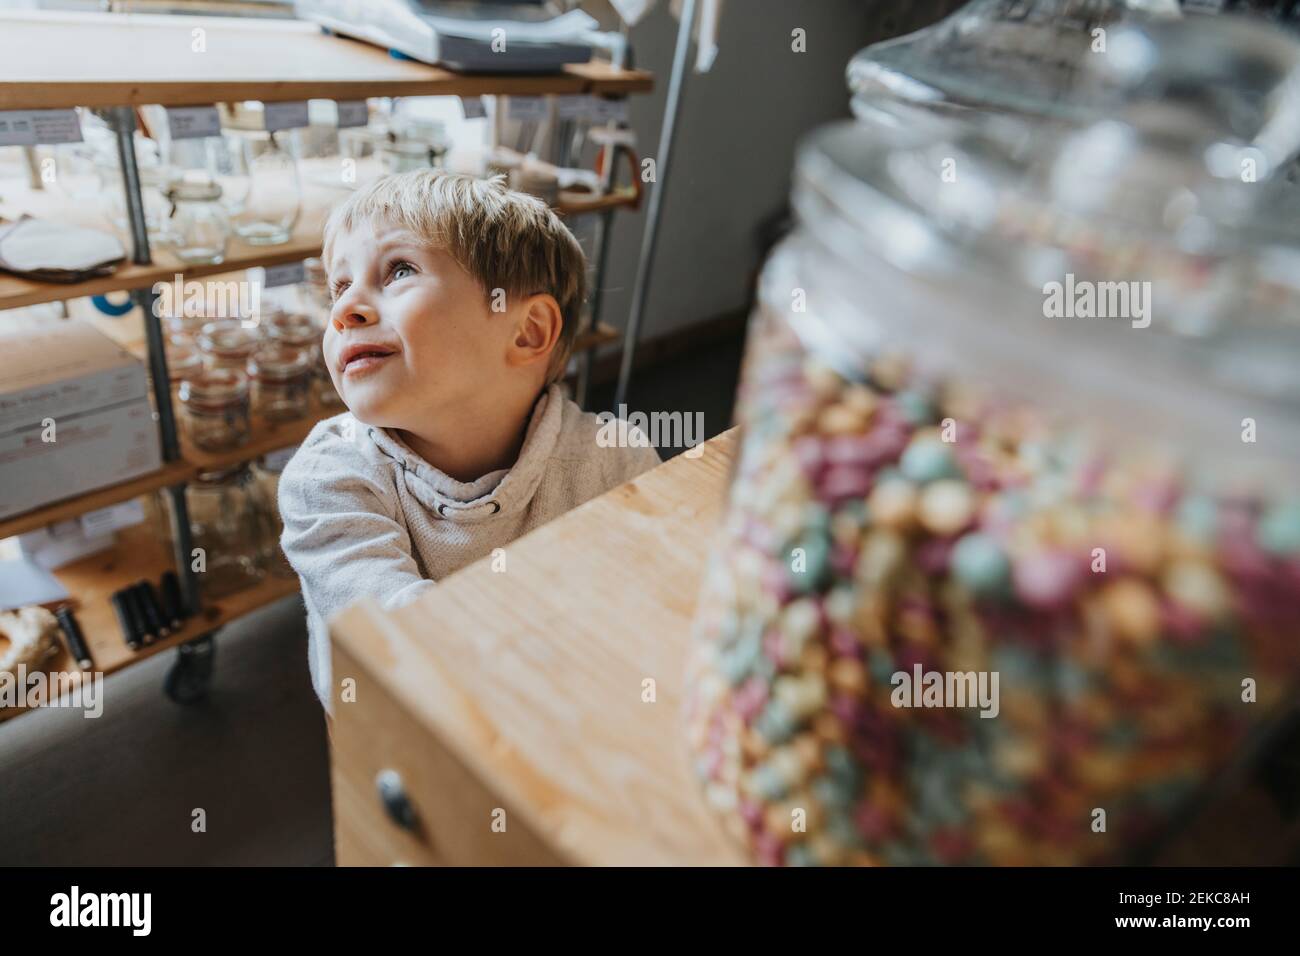 Blond little boy day dreaming while standing in candy store Stock Photo